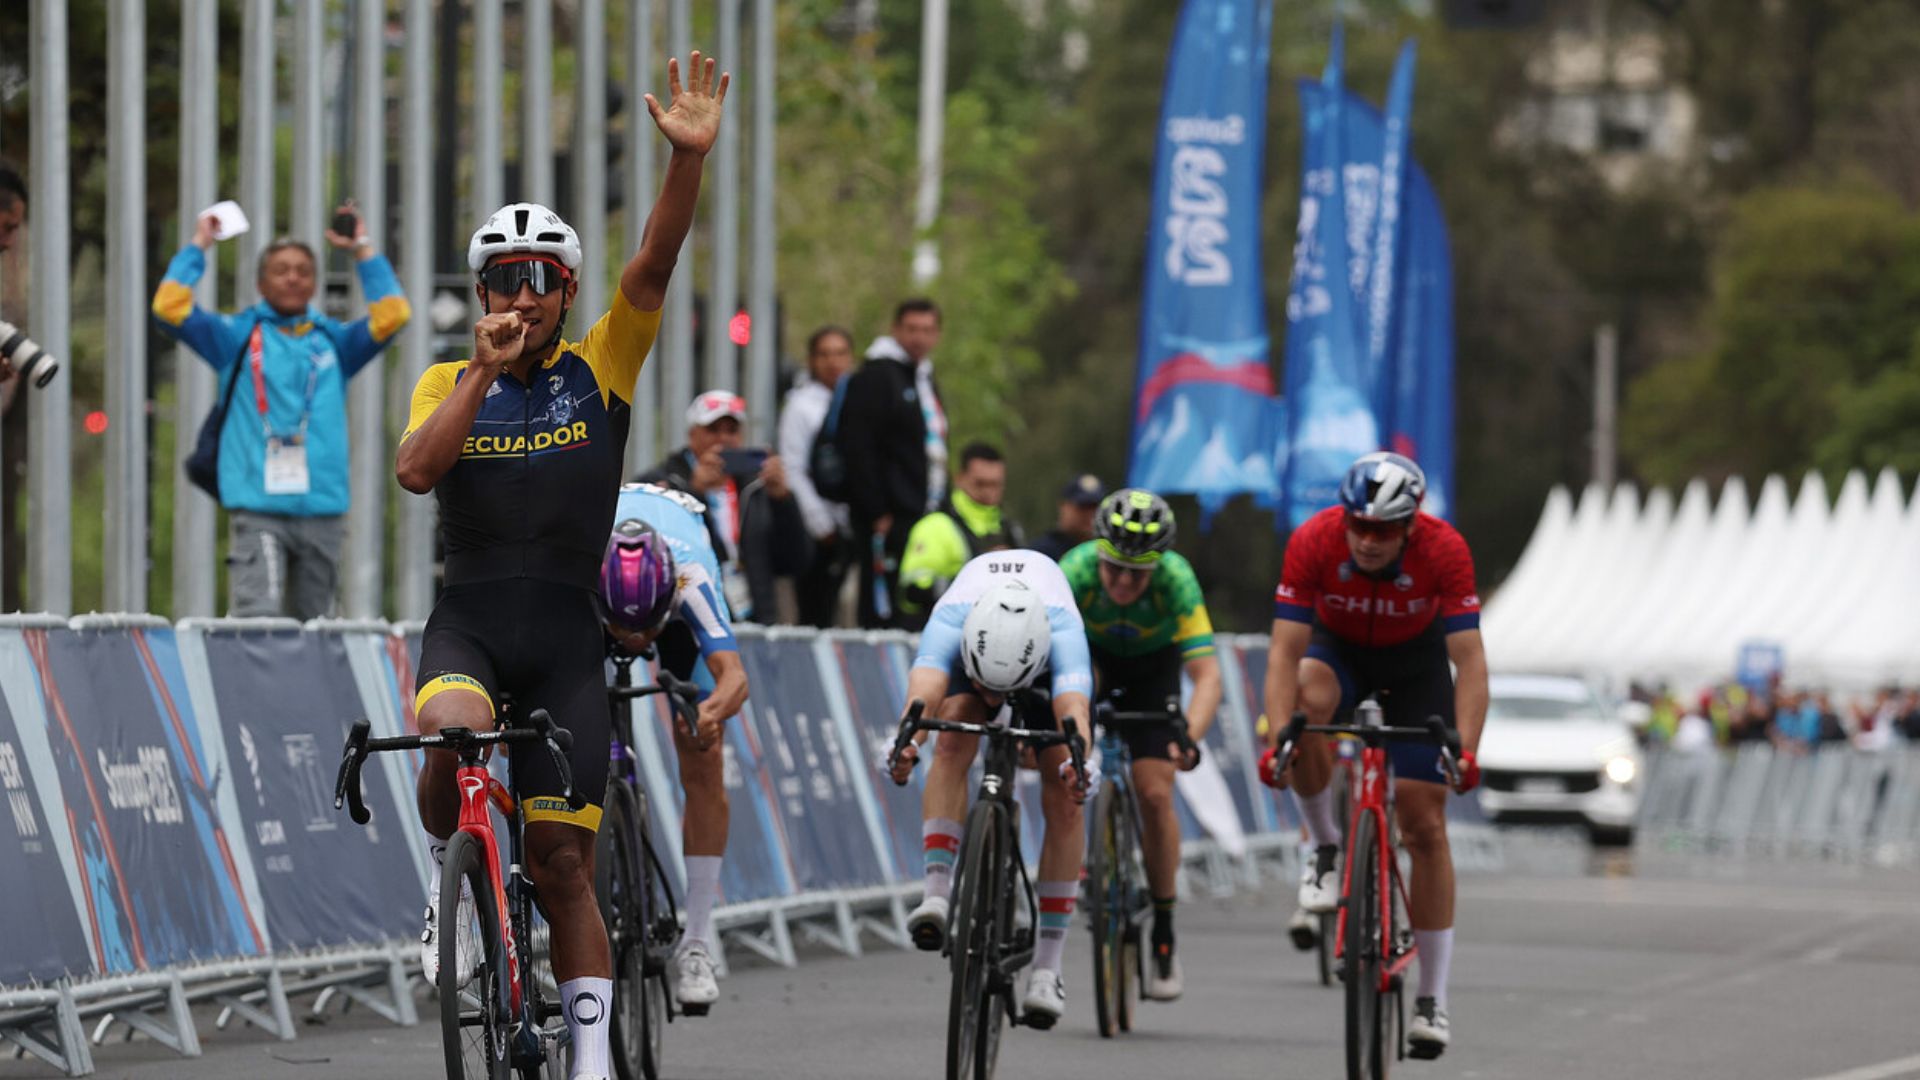 Ecuador wins the gold in road cycling